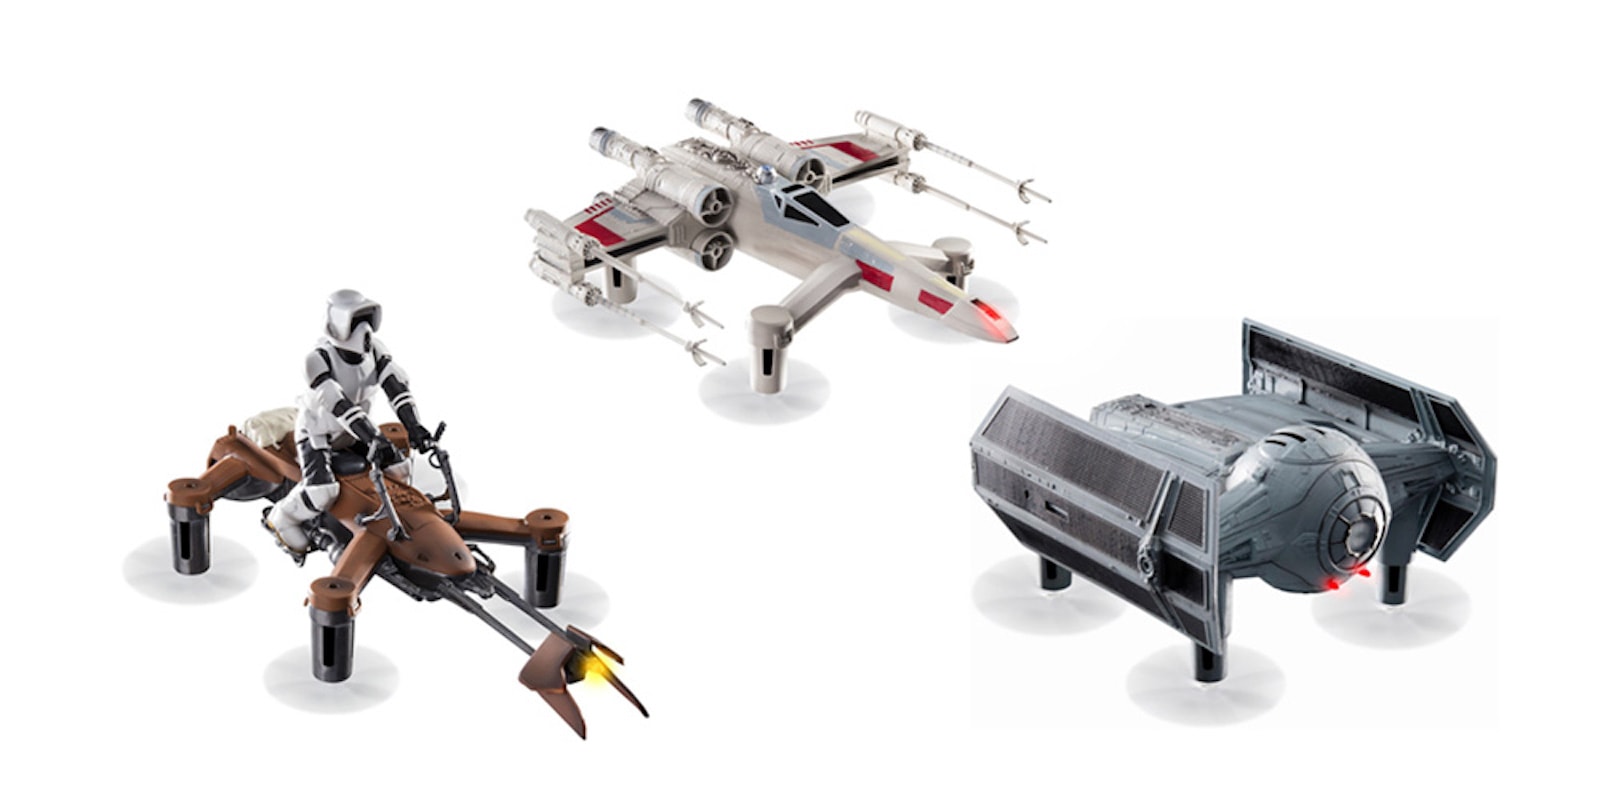 Live out your Star Wars flights of fancy with these high performance, feature-rich drones.